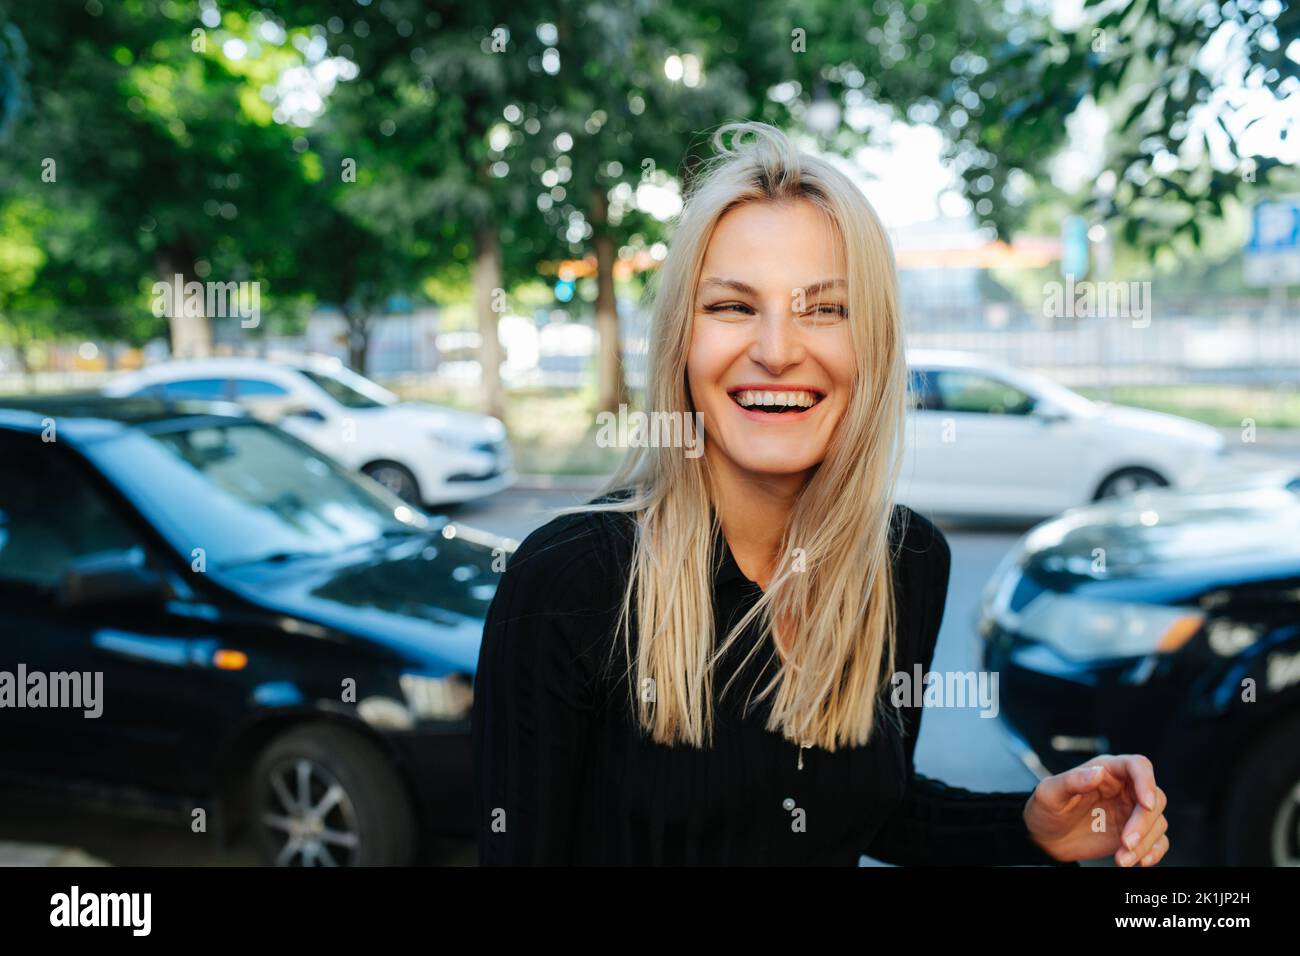 Positive young blond woman smiling in front of a car parking in background. Looking to the side. Stock Photo